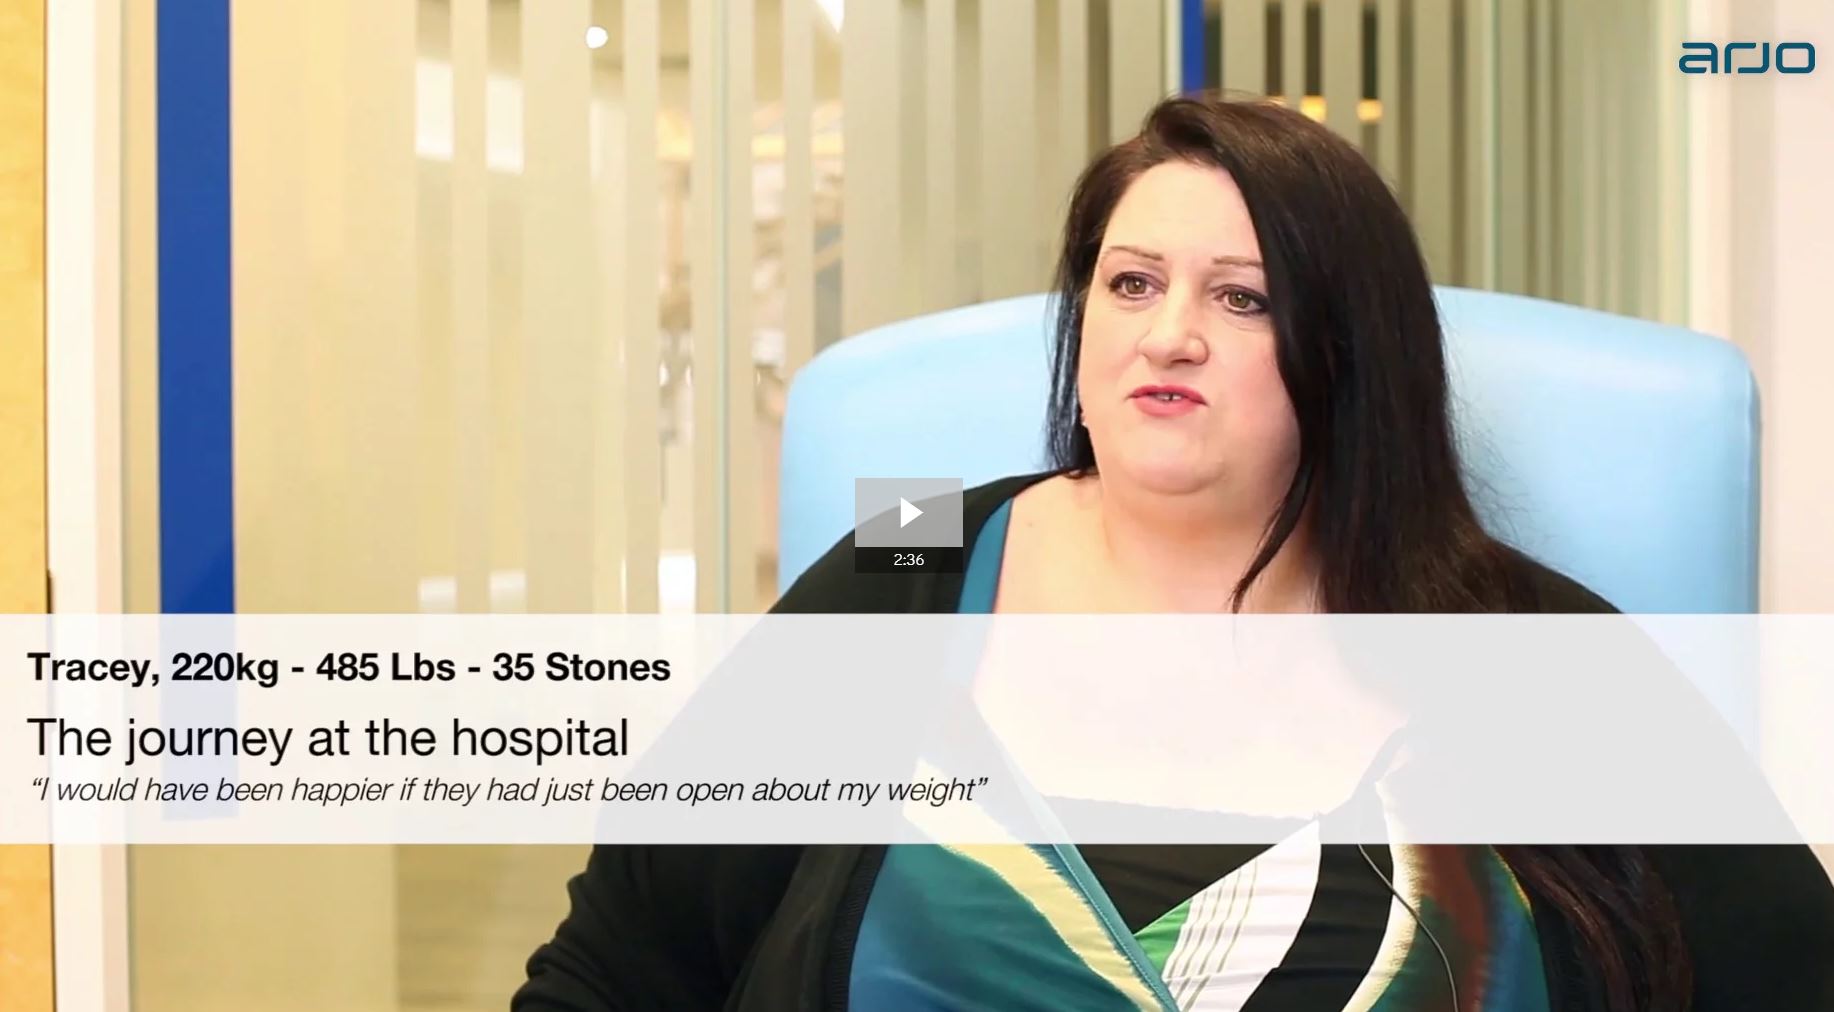 A plus size patient’s journey at the hospital